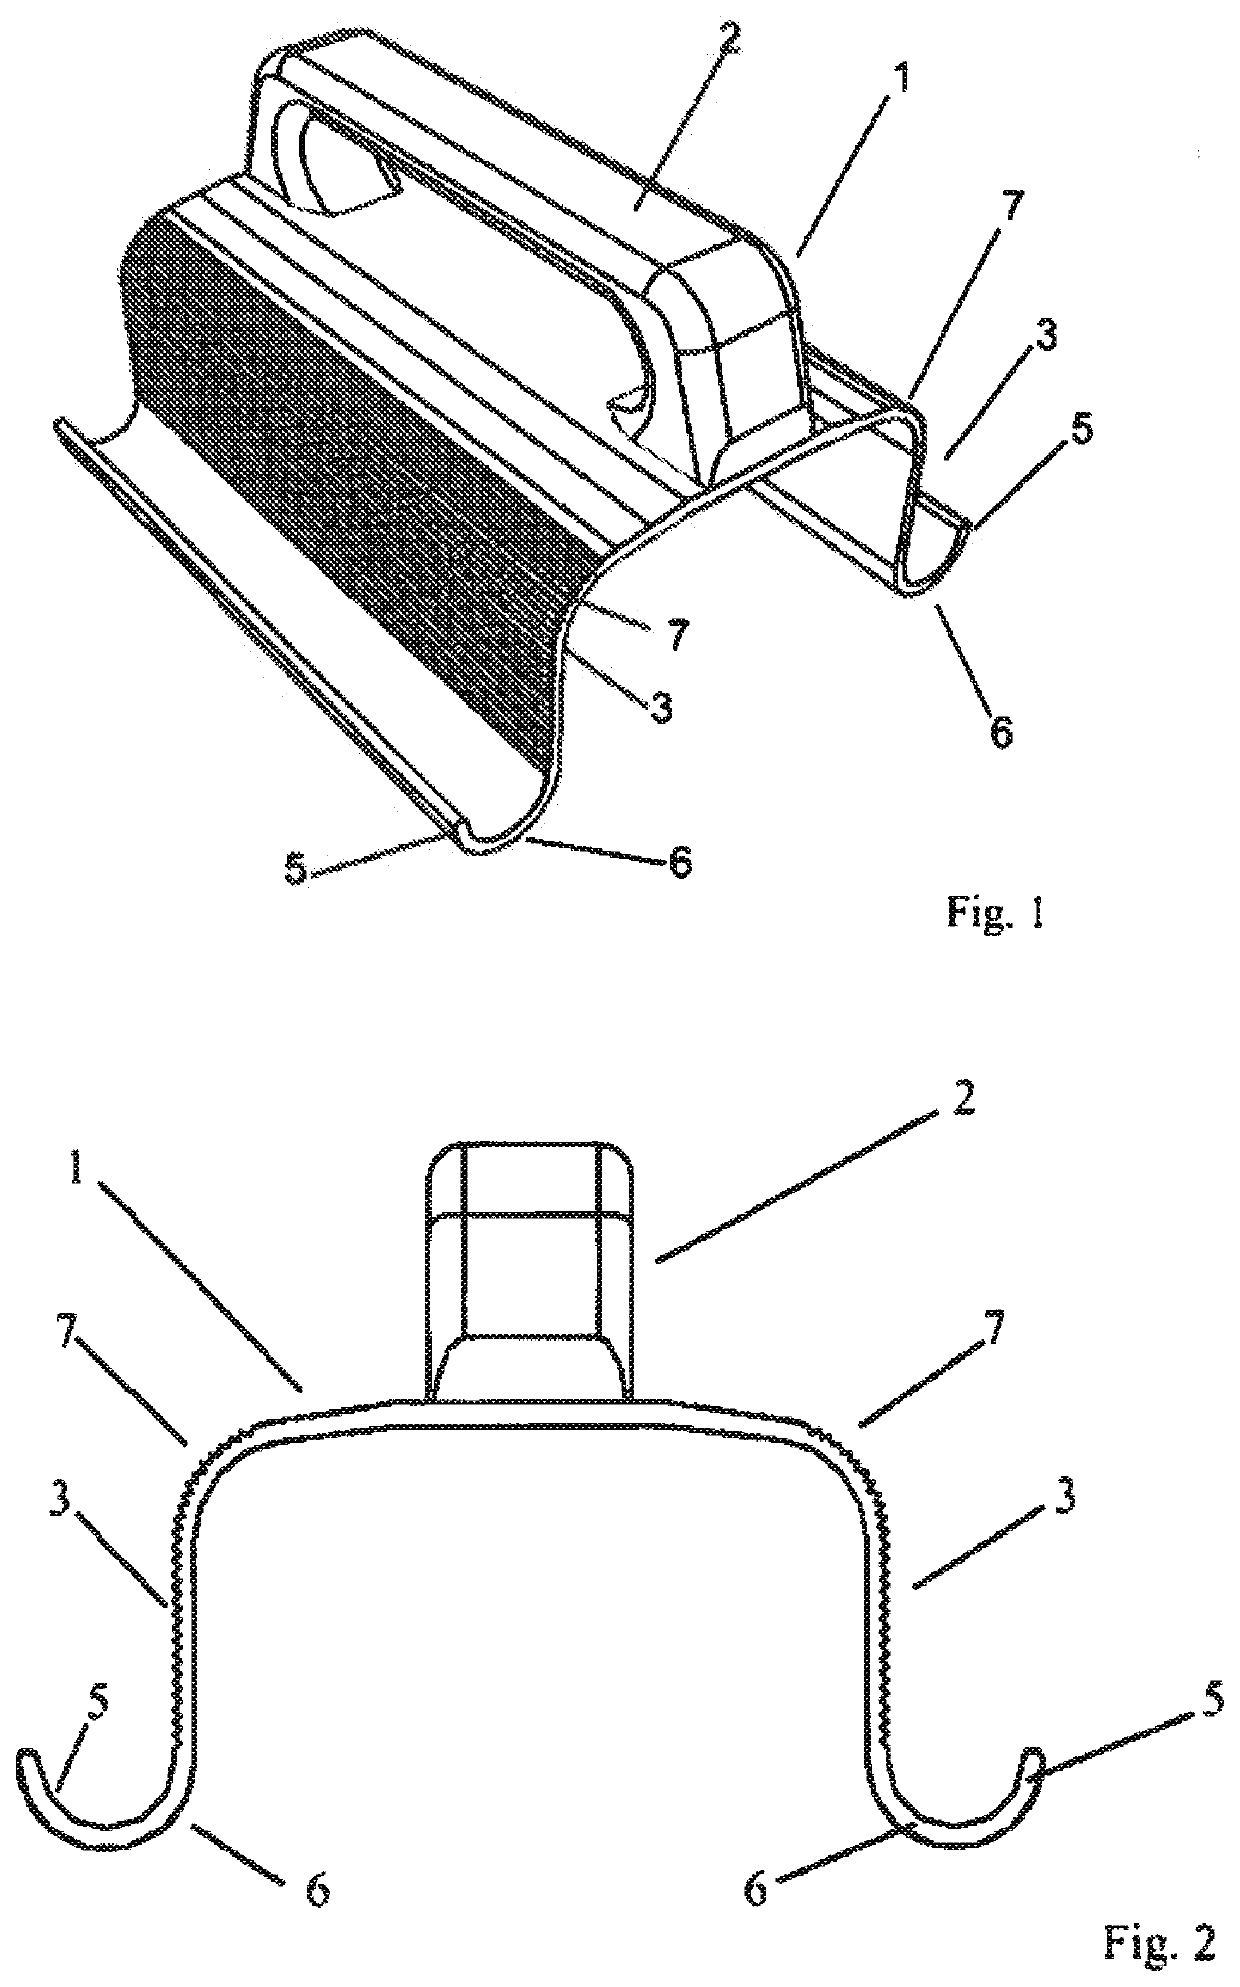 Multi-purpose holding device and method for use of the same